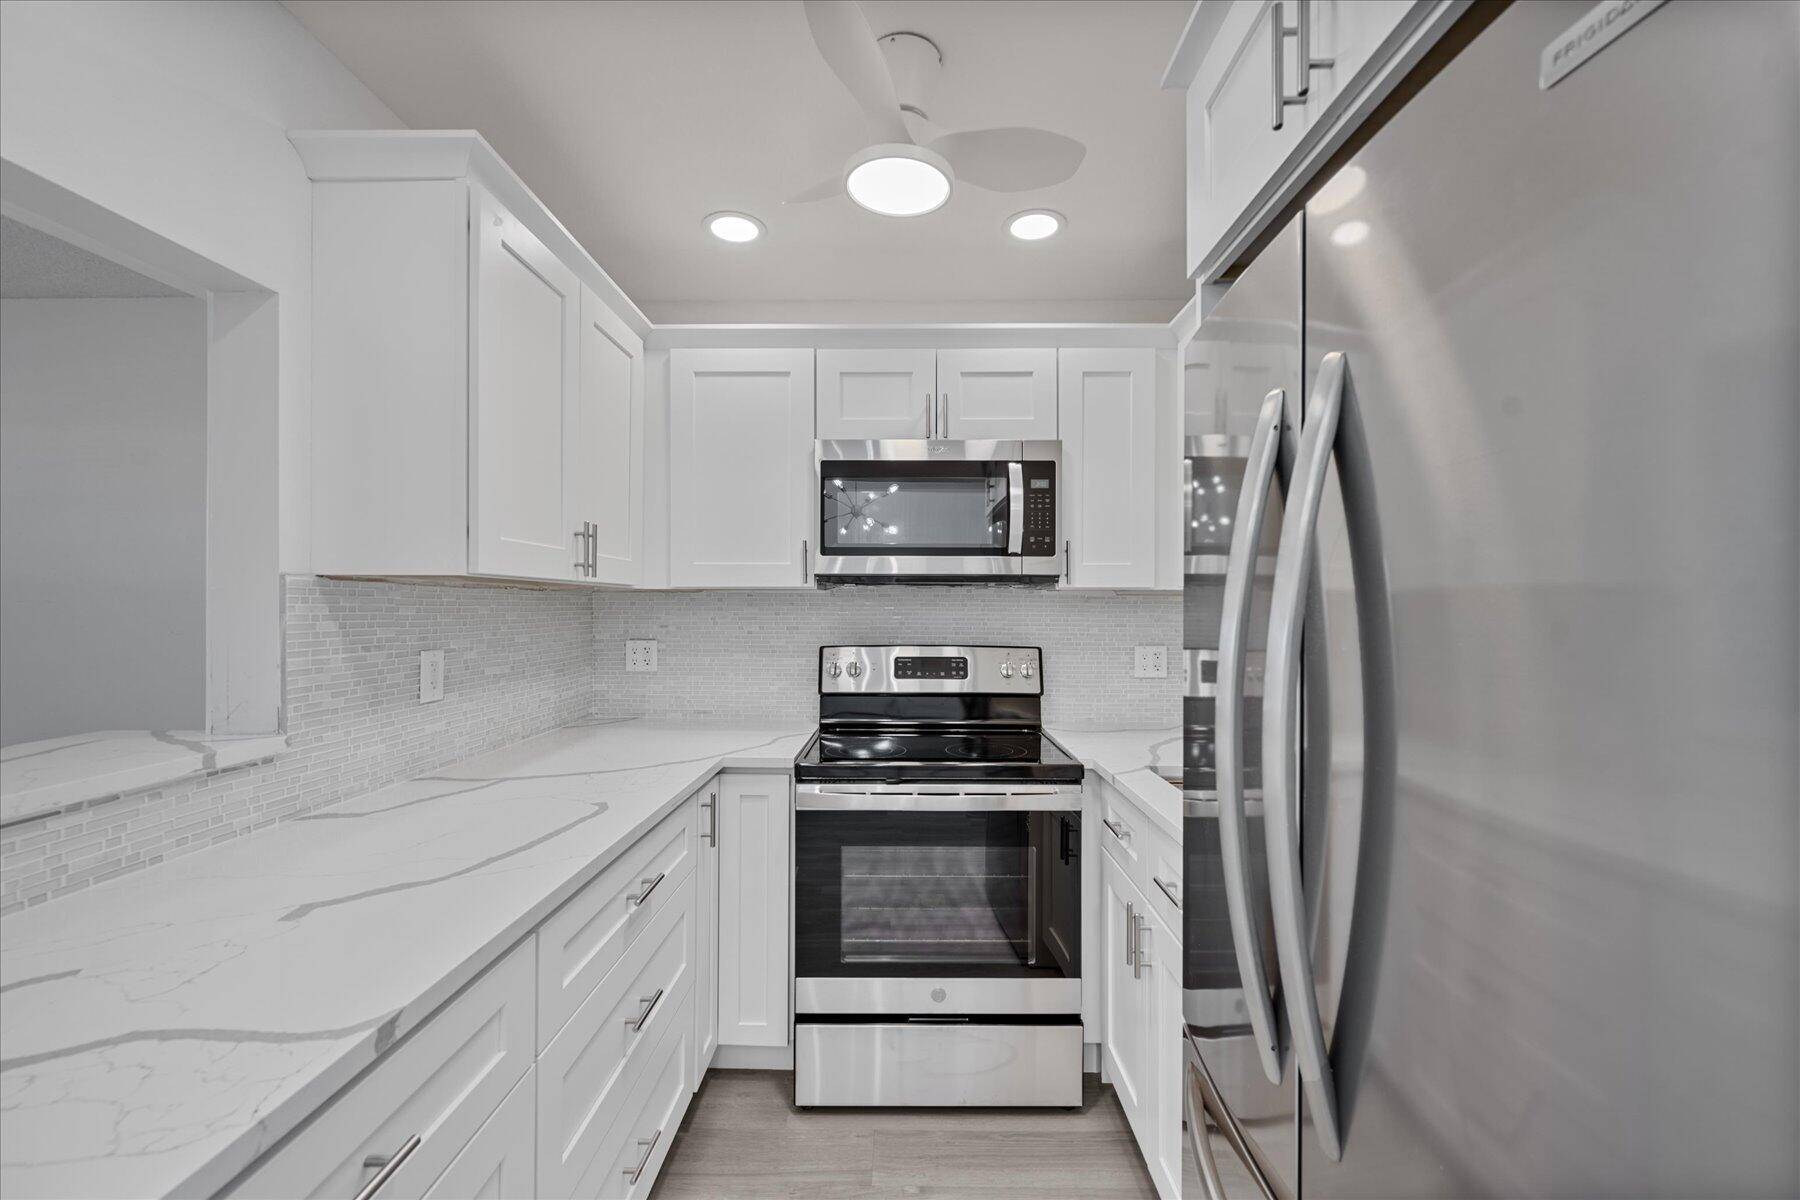 Welcome to this beautifully renovated 1 bedroom, 1 bathroom condo in a vibrant 55 community.